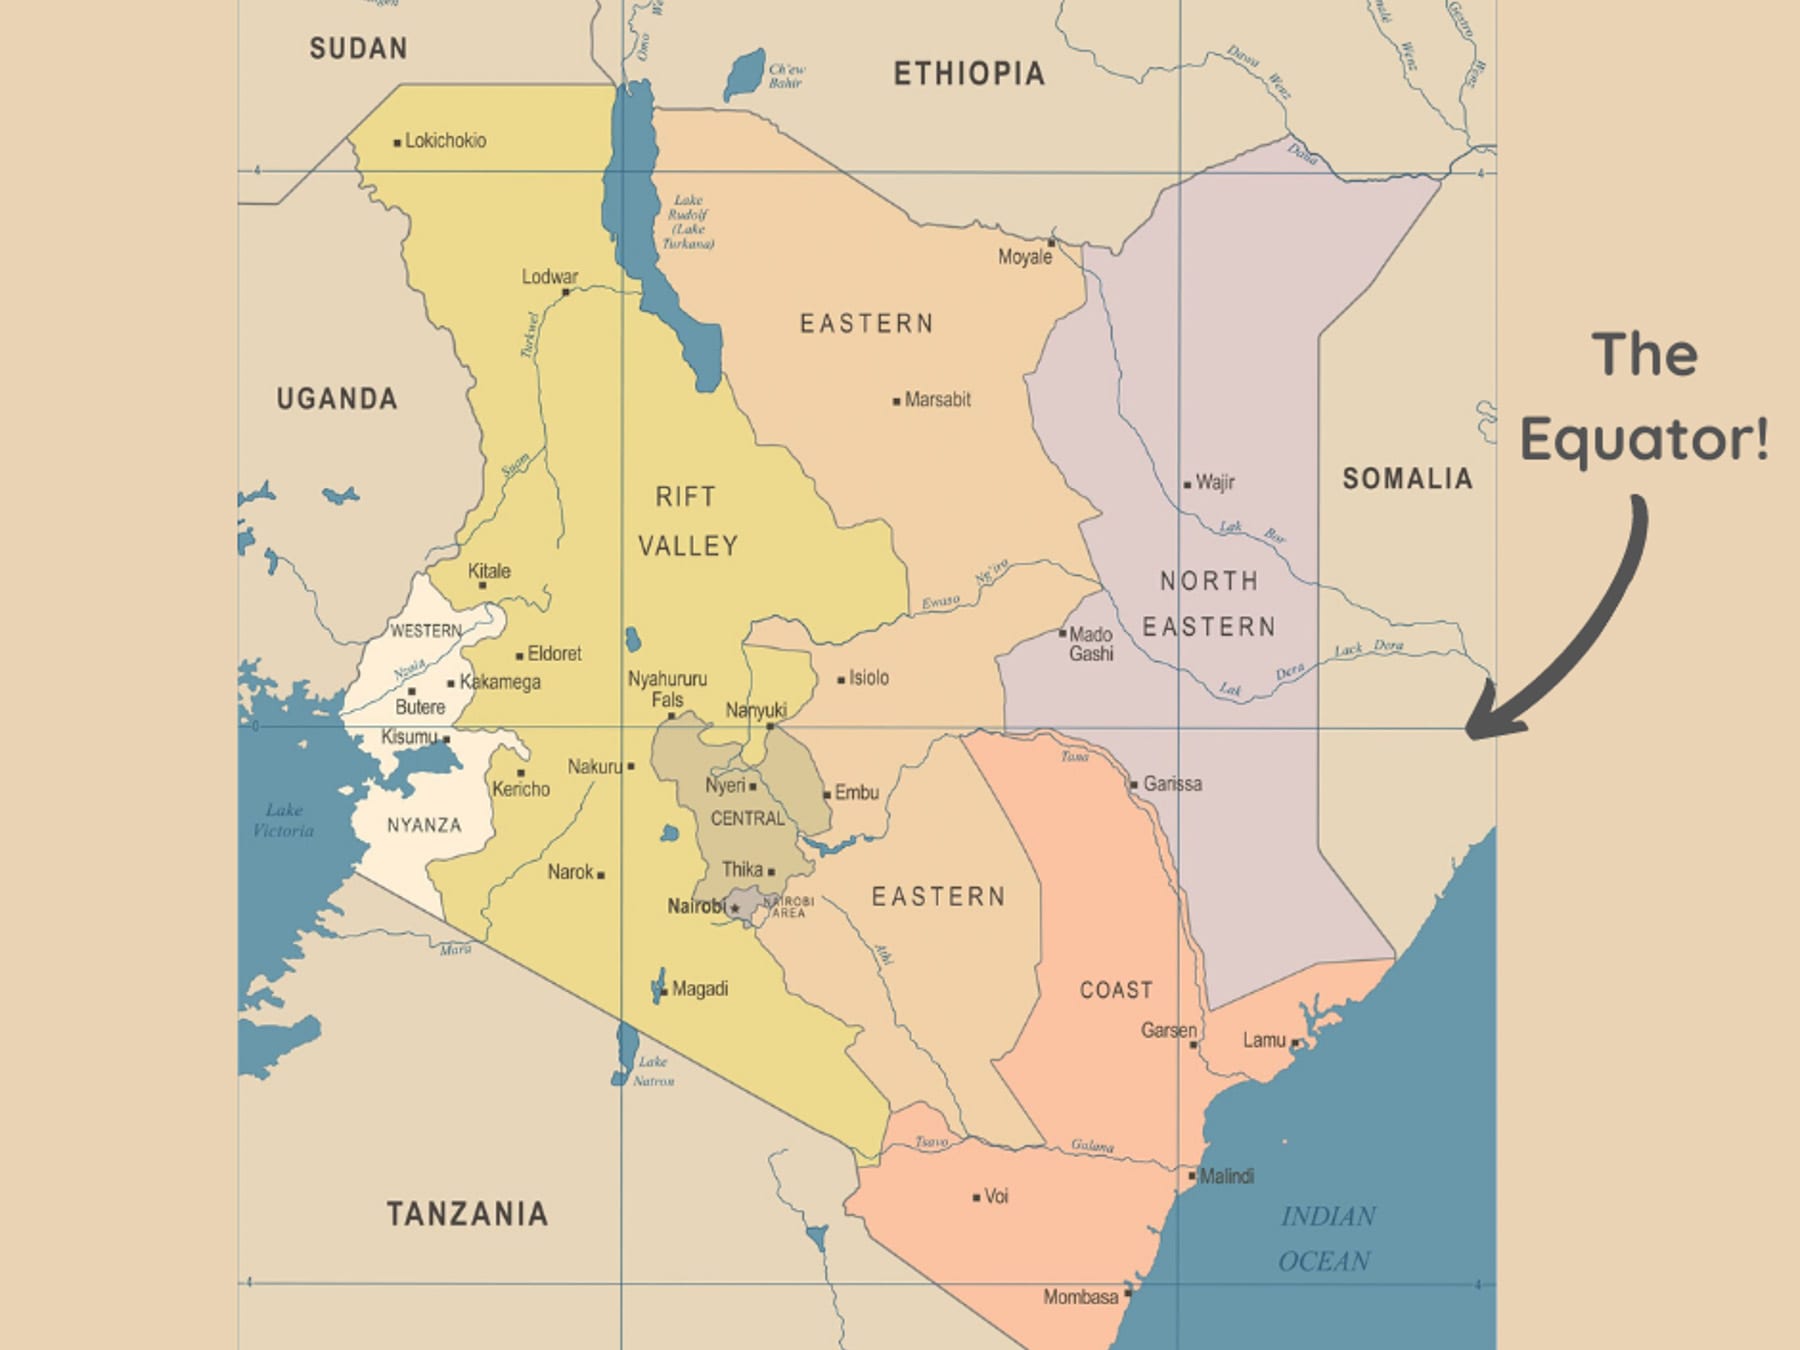 Kenya borders five countries and the Equator runs through the centre of the country. Image by dikobrazik, 123rf.com, annotations by Ayaan Chitty.